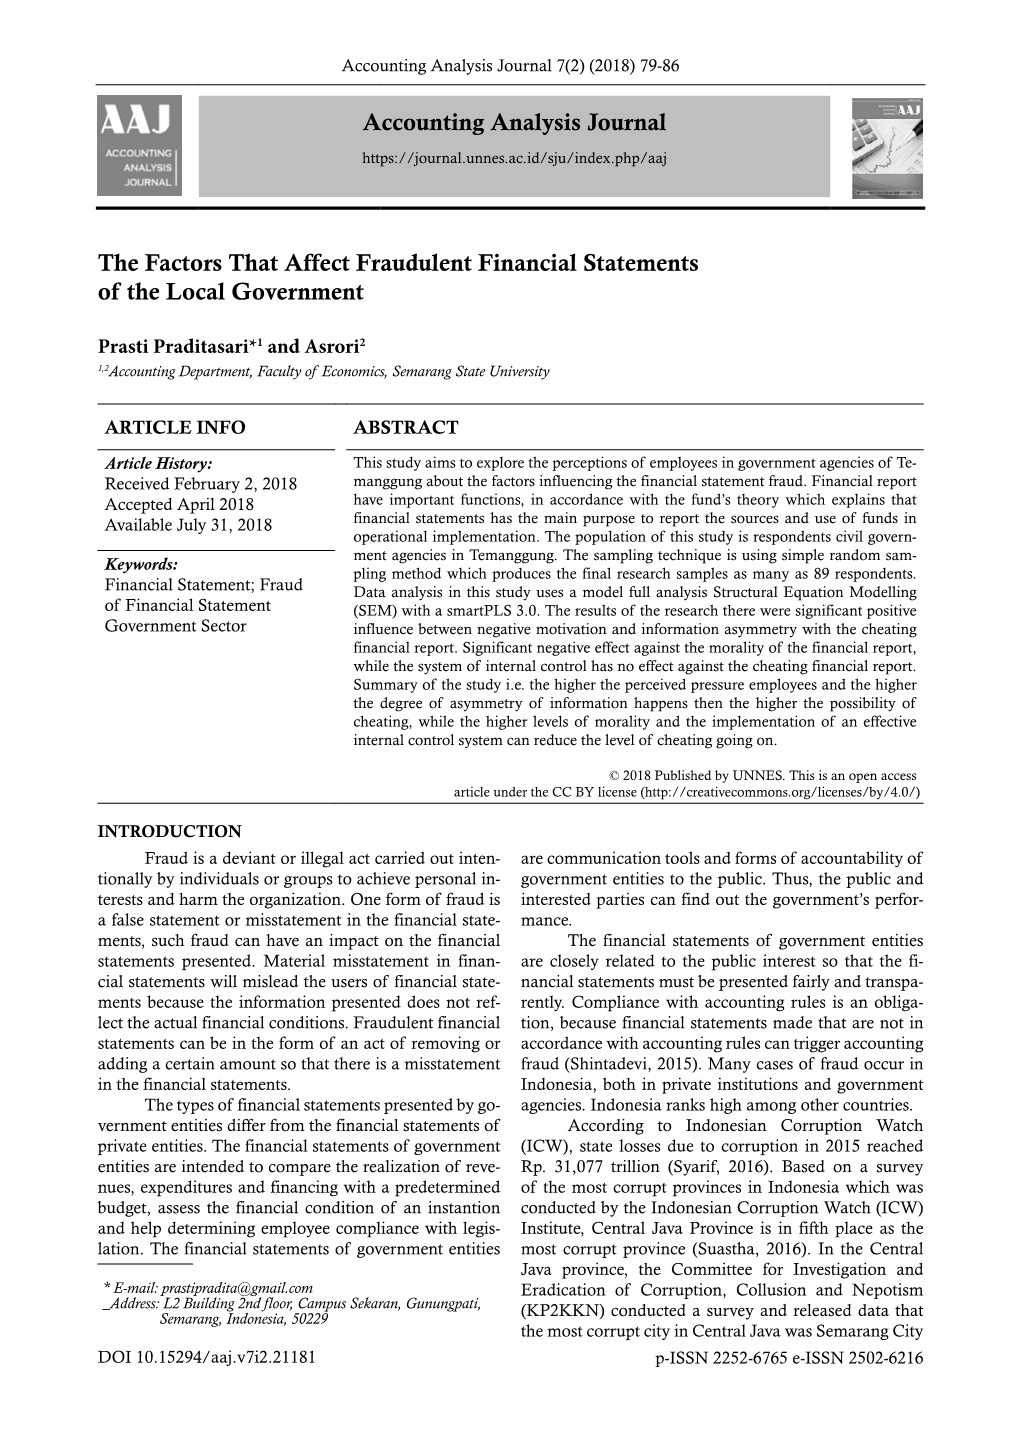 Accounting Analysis Journal the Factors That Affect Fraudulent